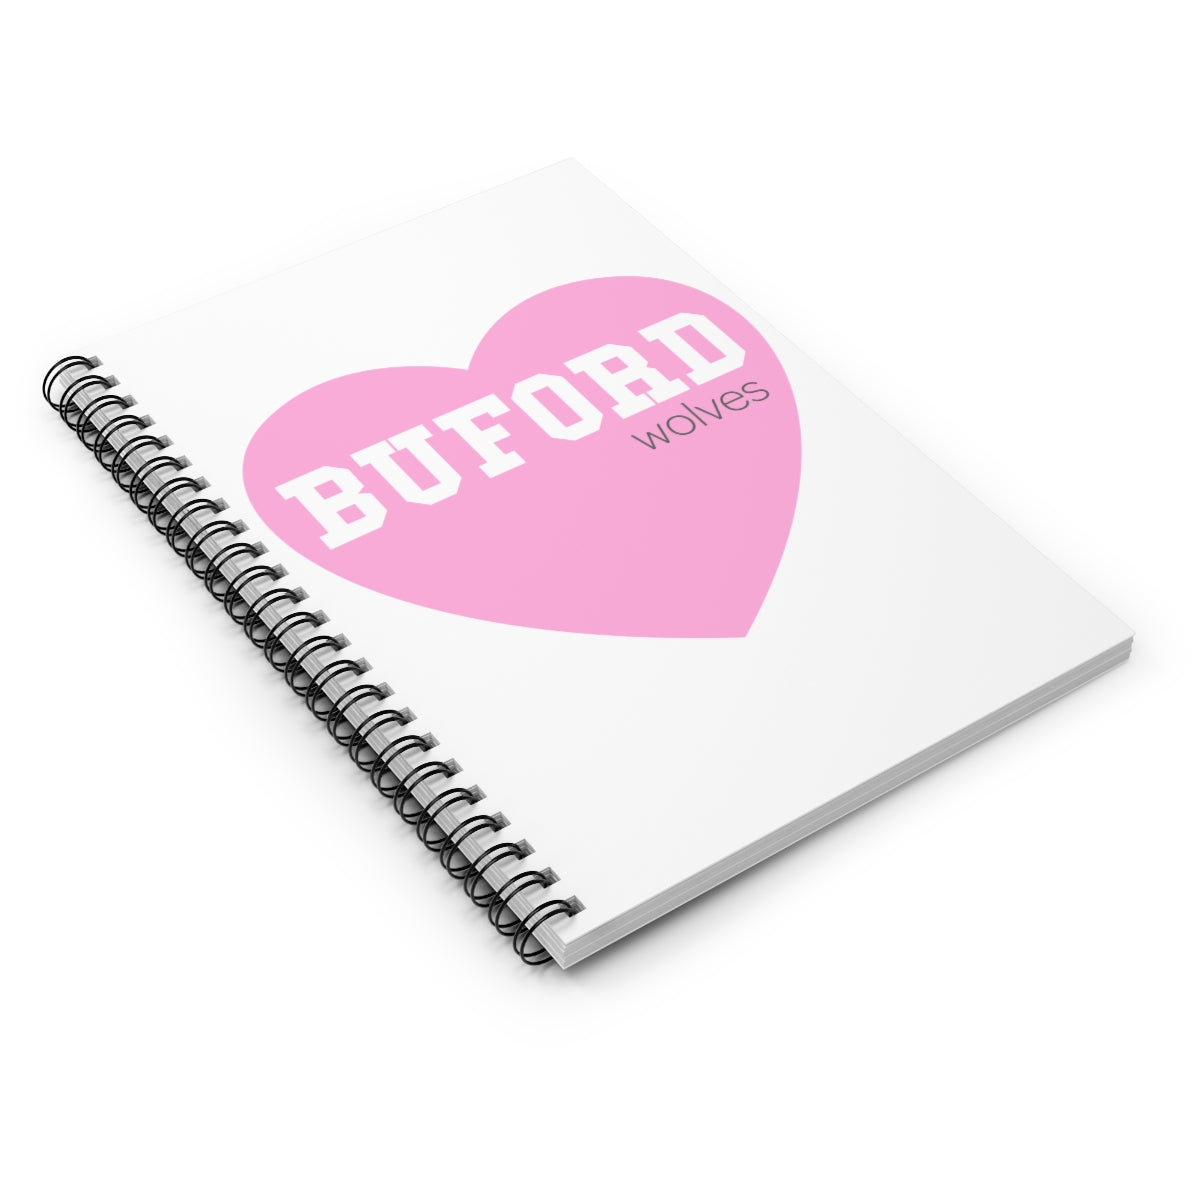 Buford Ruled Notebook